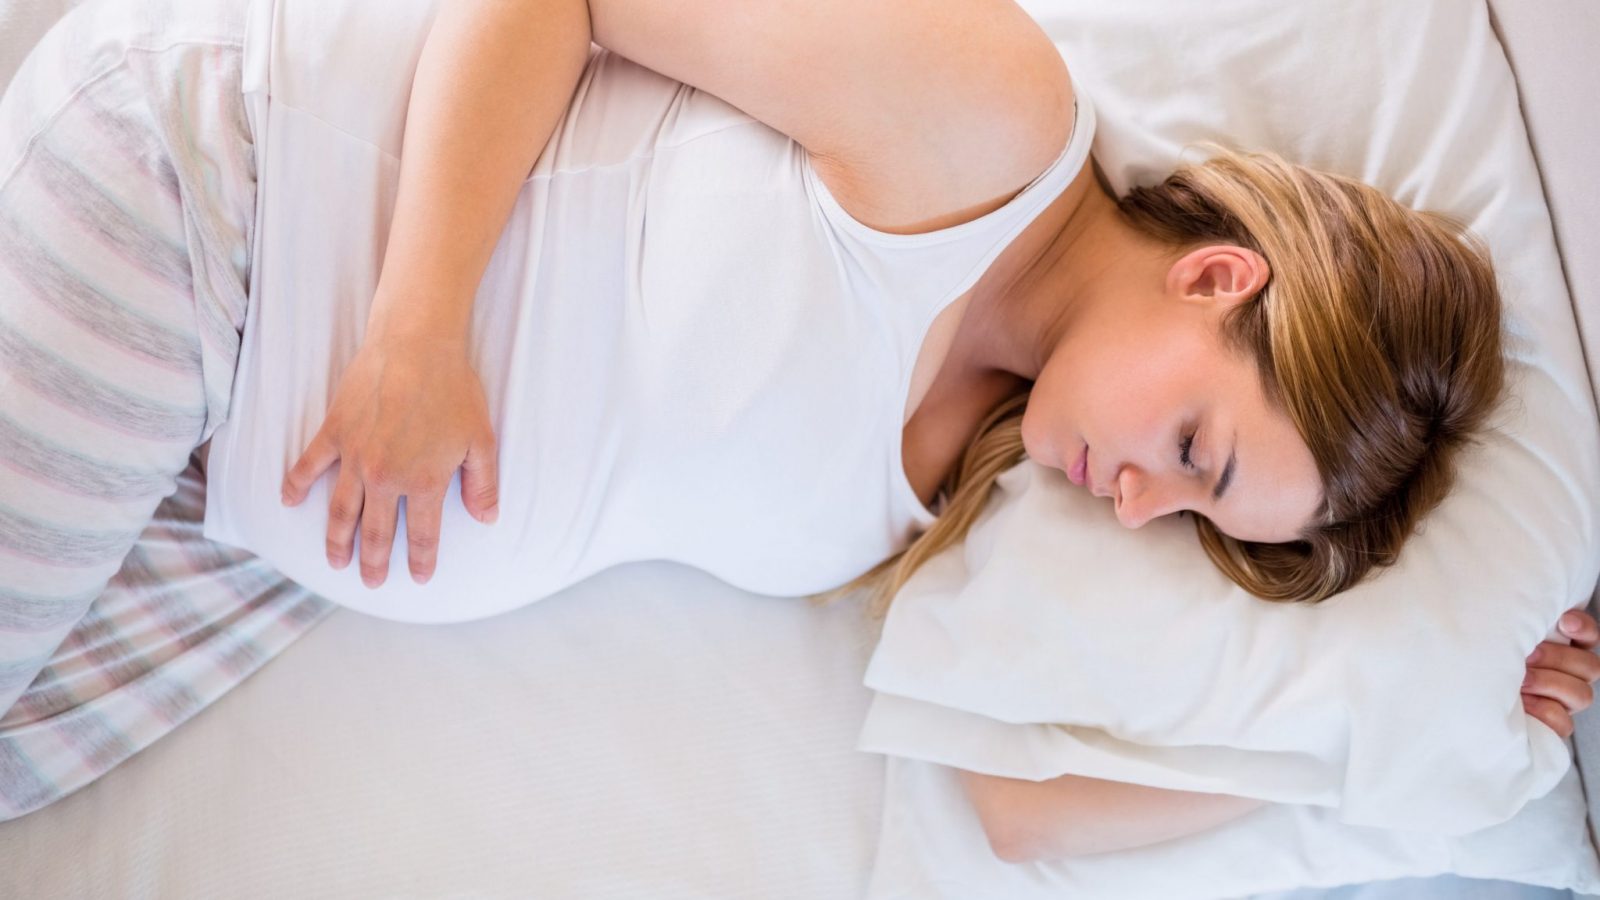 Woman Getting a Good Night's Sleep During Pregnancy